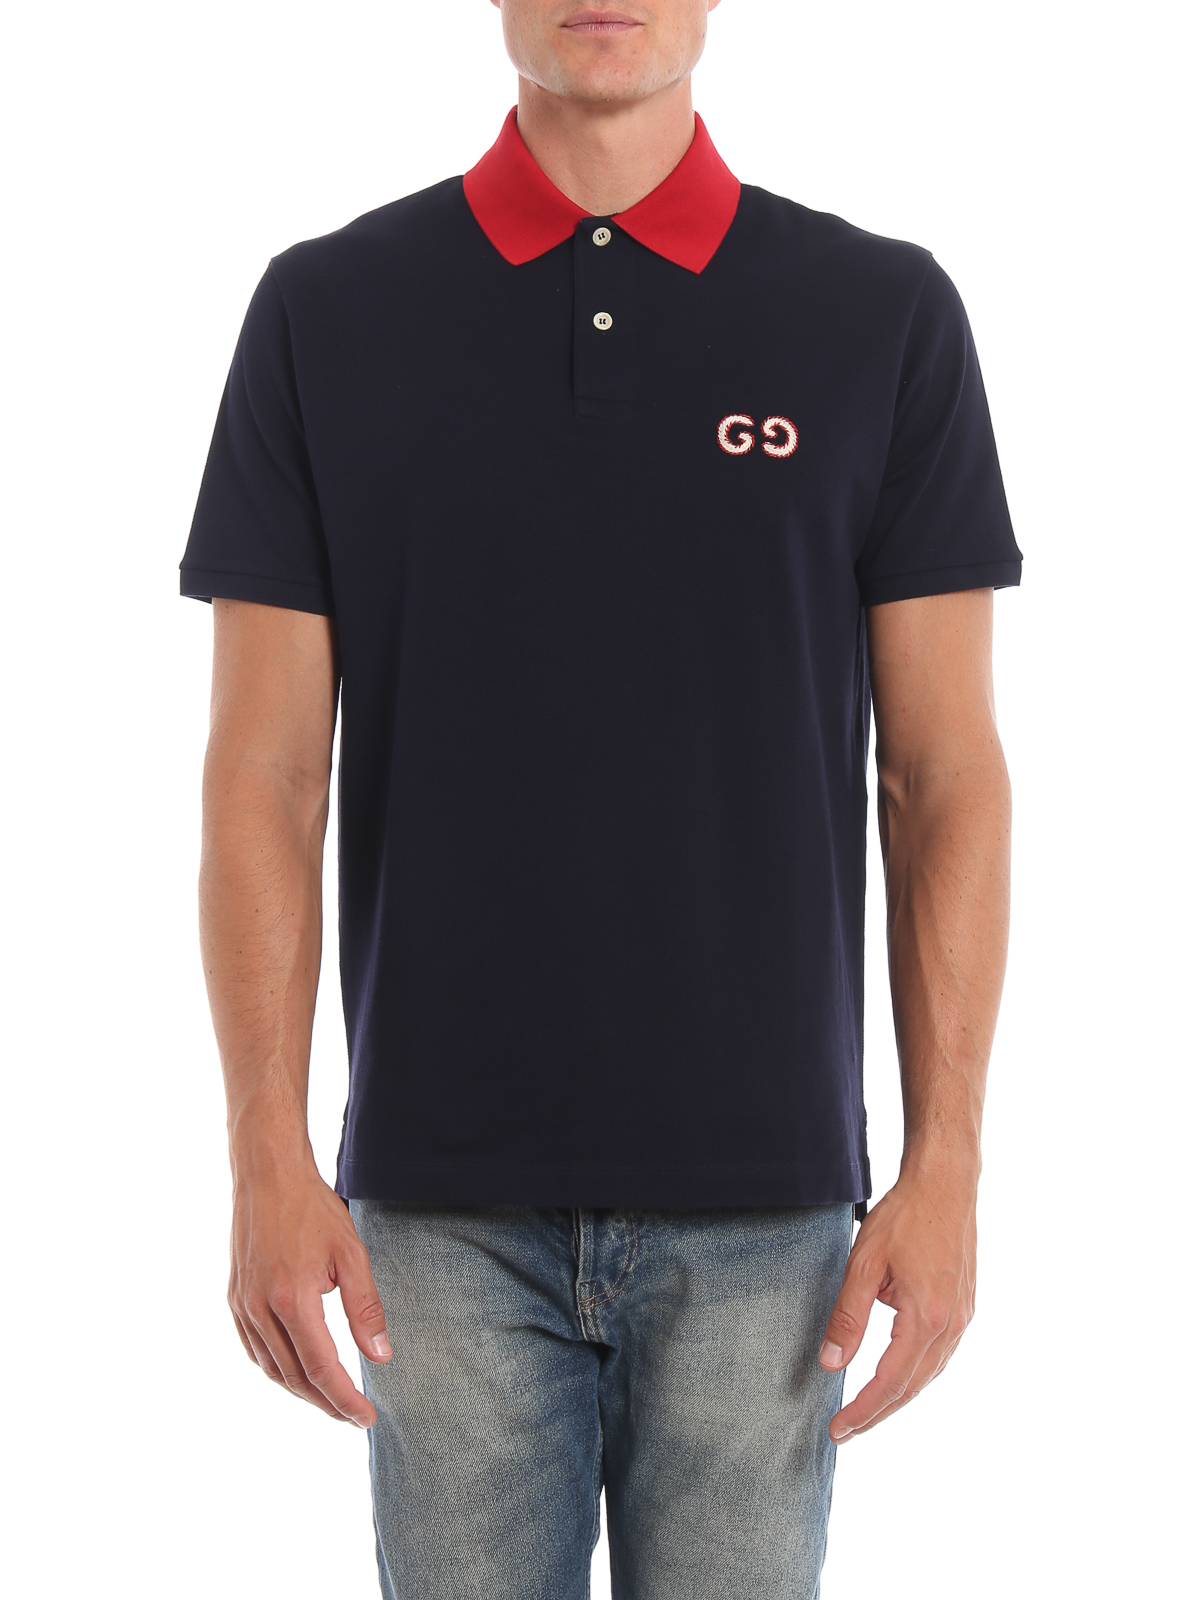 sammensværgelse Oceanien USA Polo shirts Gucci - GG embroidered navy blue polo shirt - 574086XJA6C4062